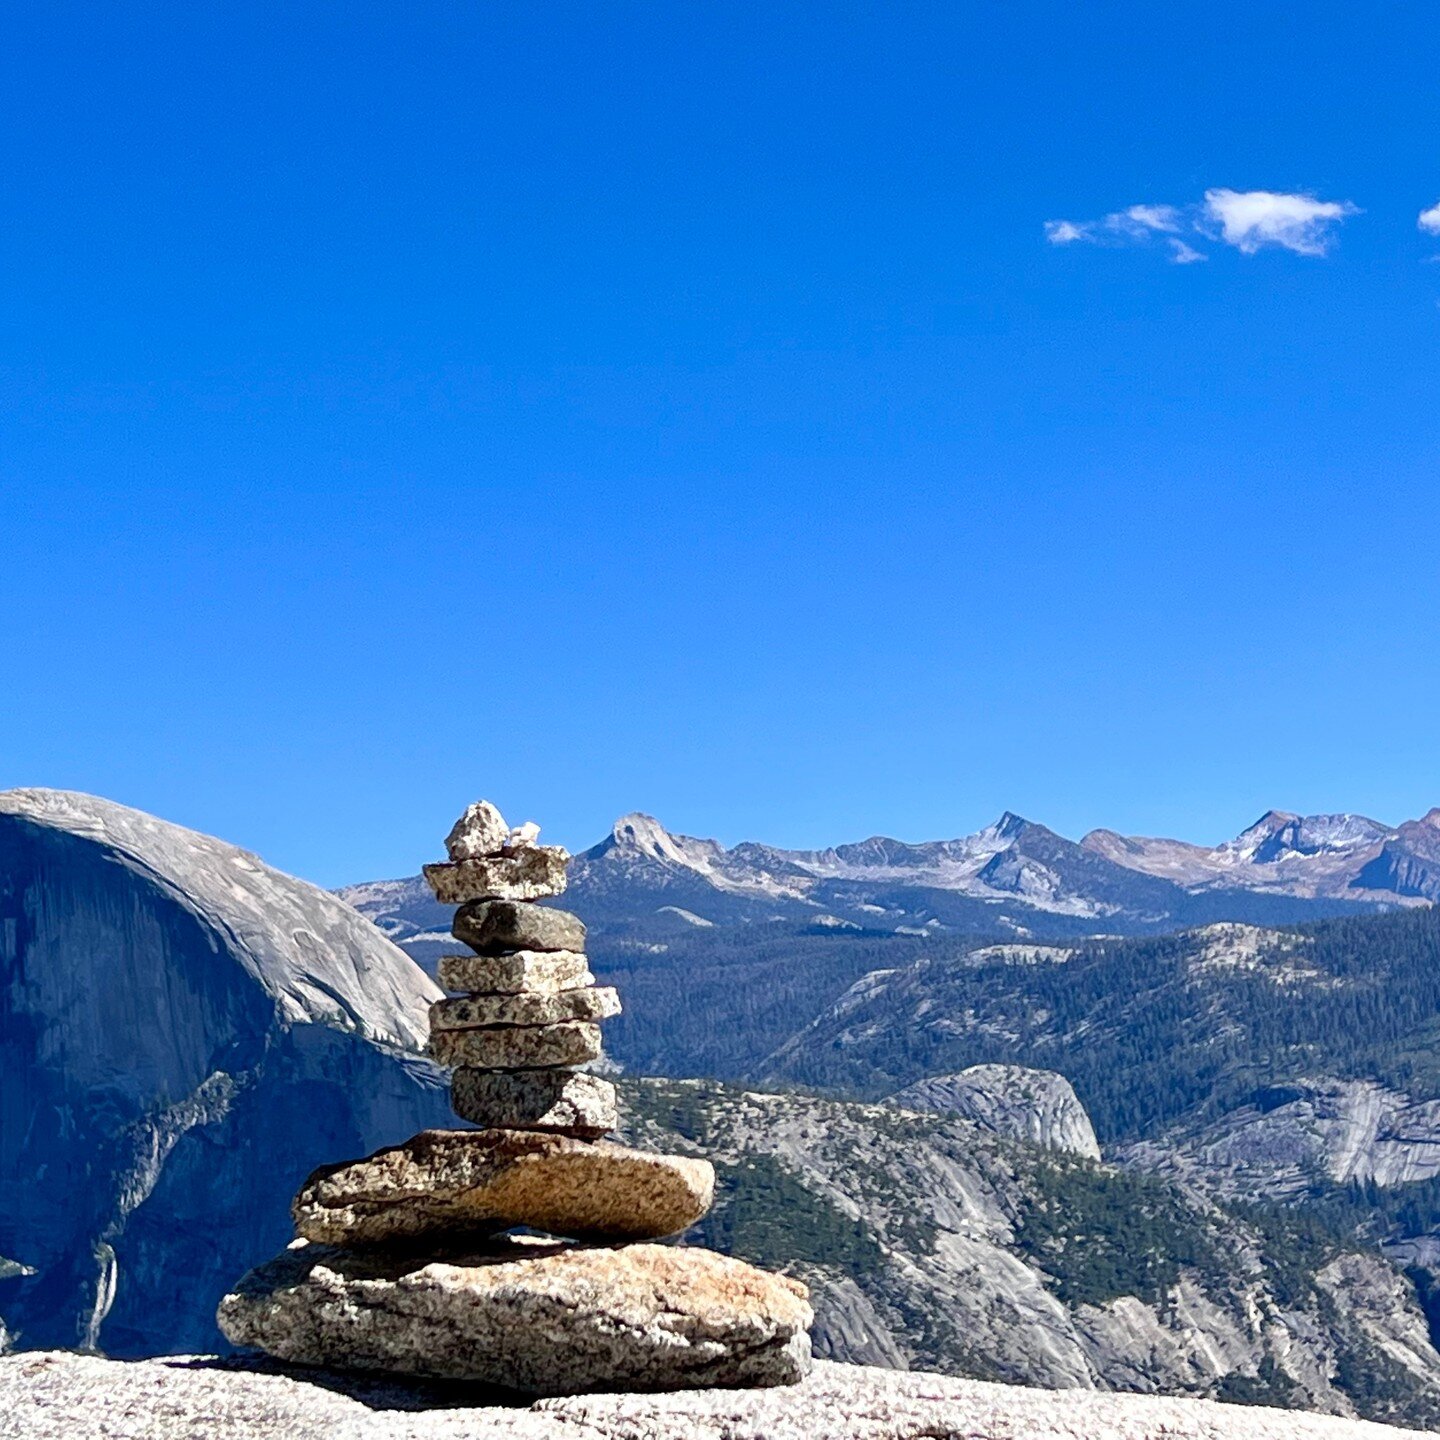 Last weekend we built a cairn in Yosemite on the twelfth anniversary of Alex's passing. He is everywhere with us.

Here is a link to an interview for Blown Into Now - Poems for a journey, which has Alex's photos with my poems.

Wednesday October 5, 2